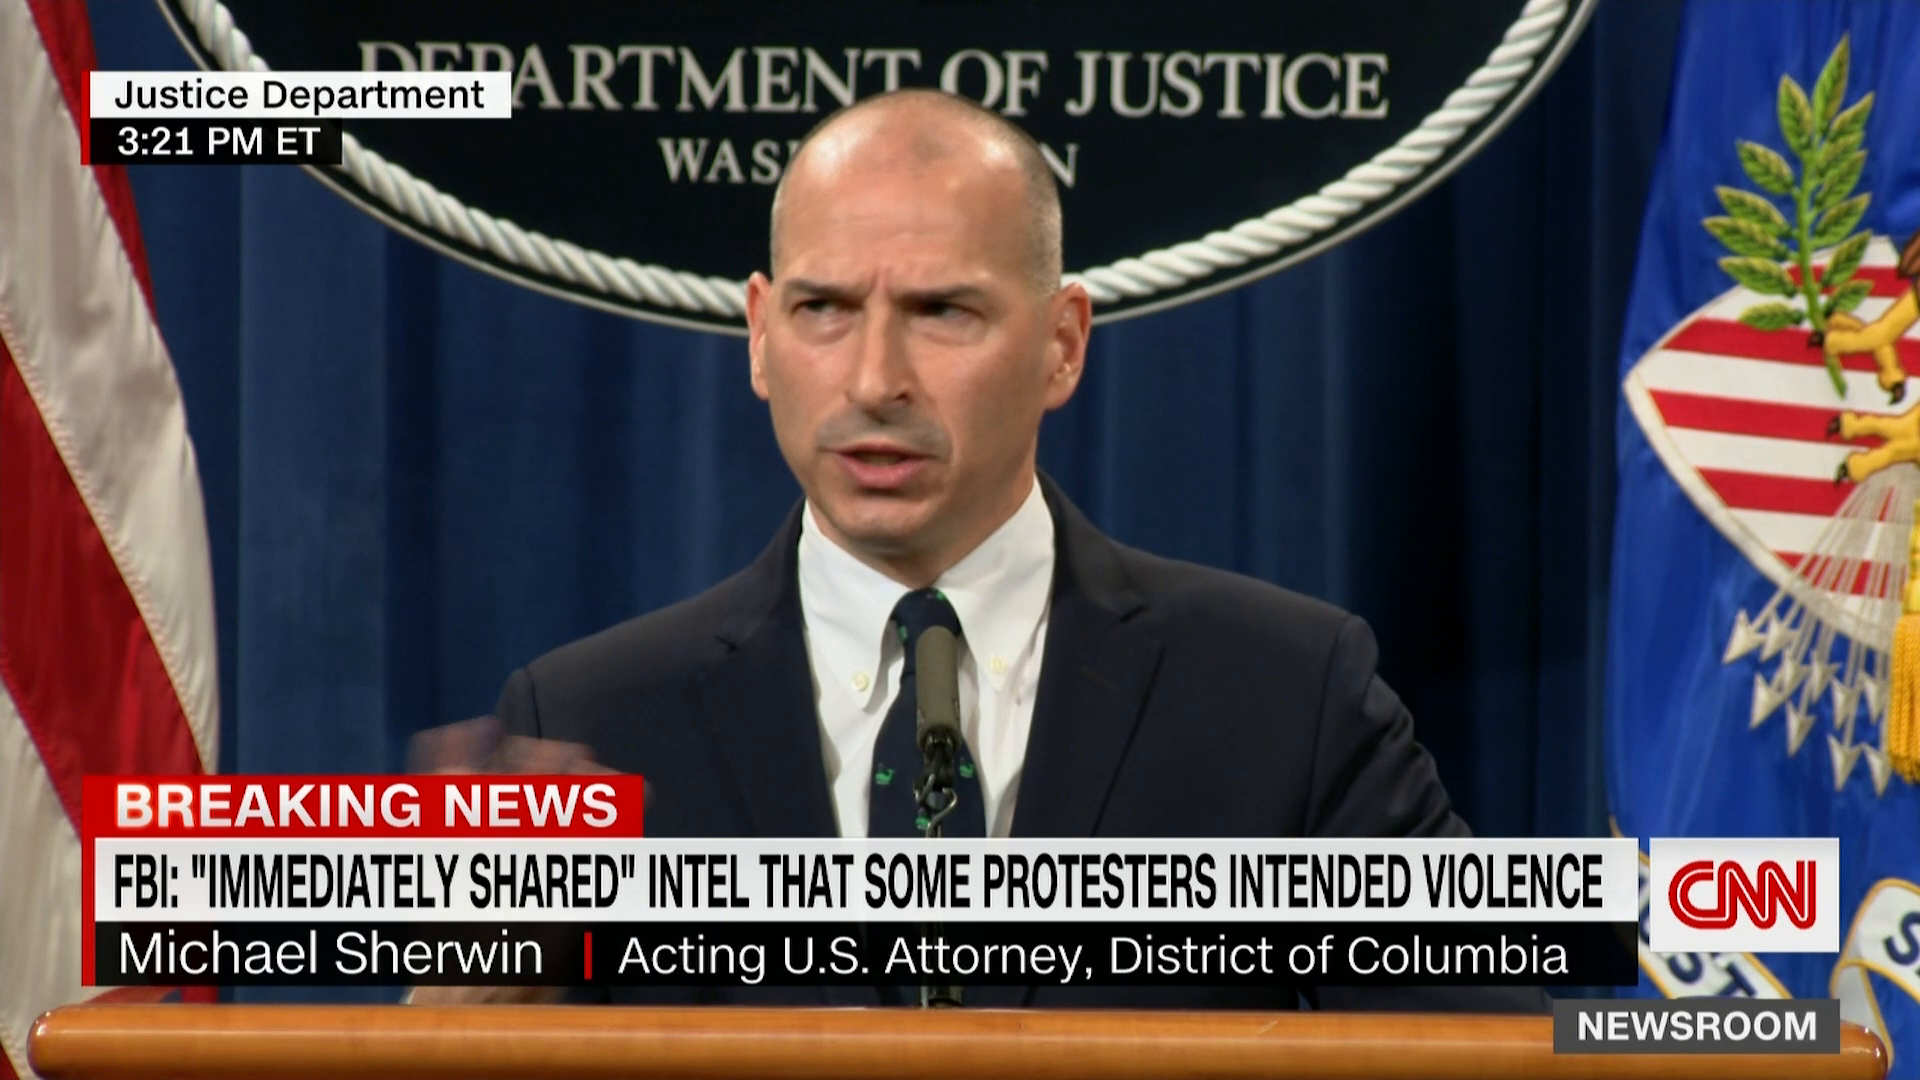 DOJ official said he expects they will accuse “hundreds” of troublemakers in the coming weeks